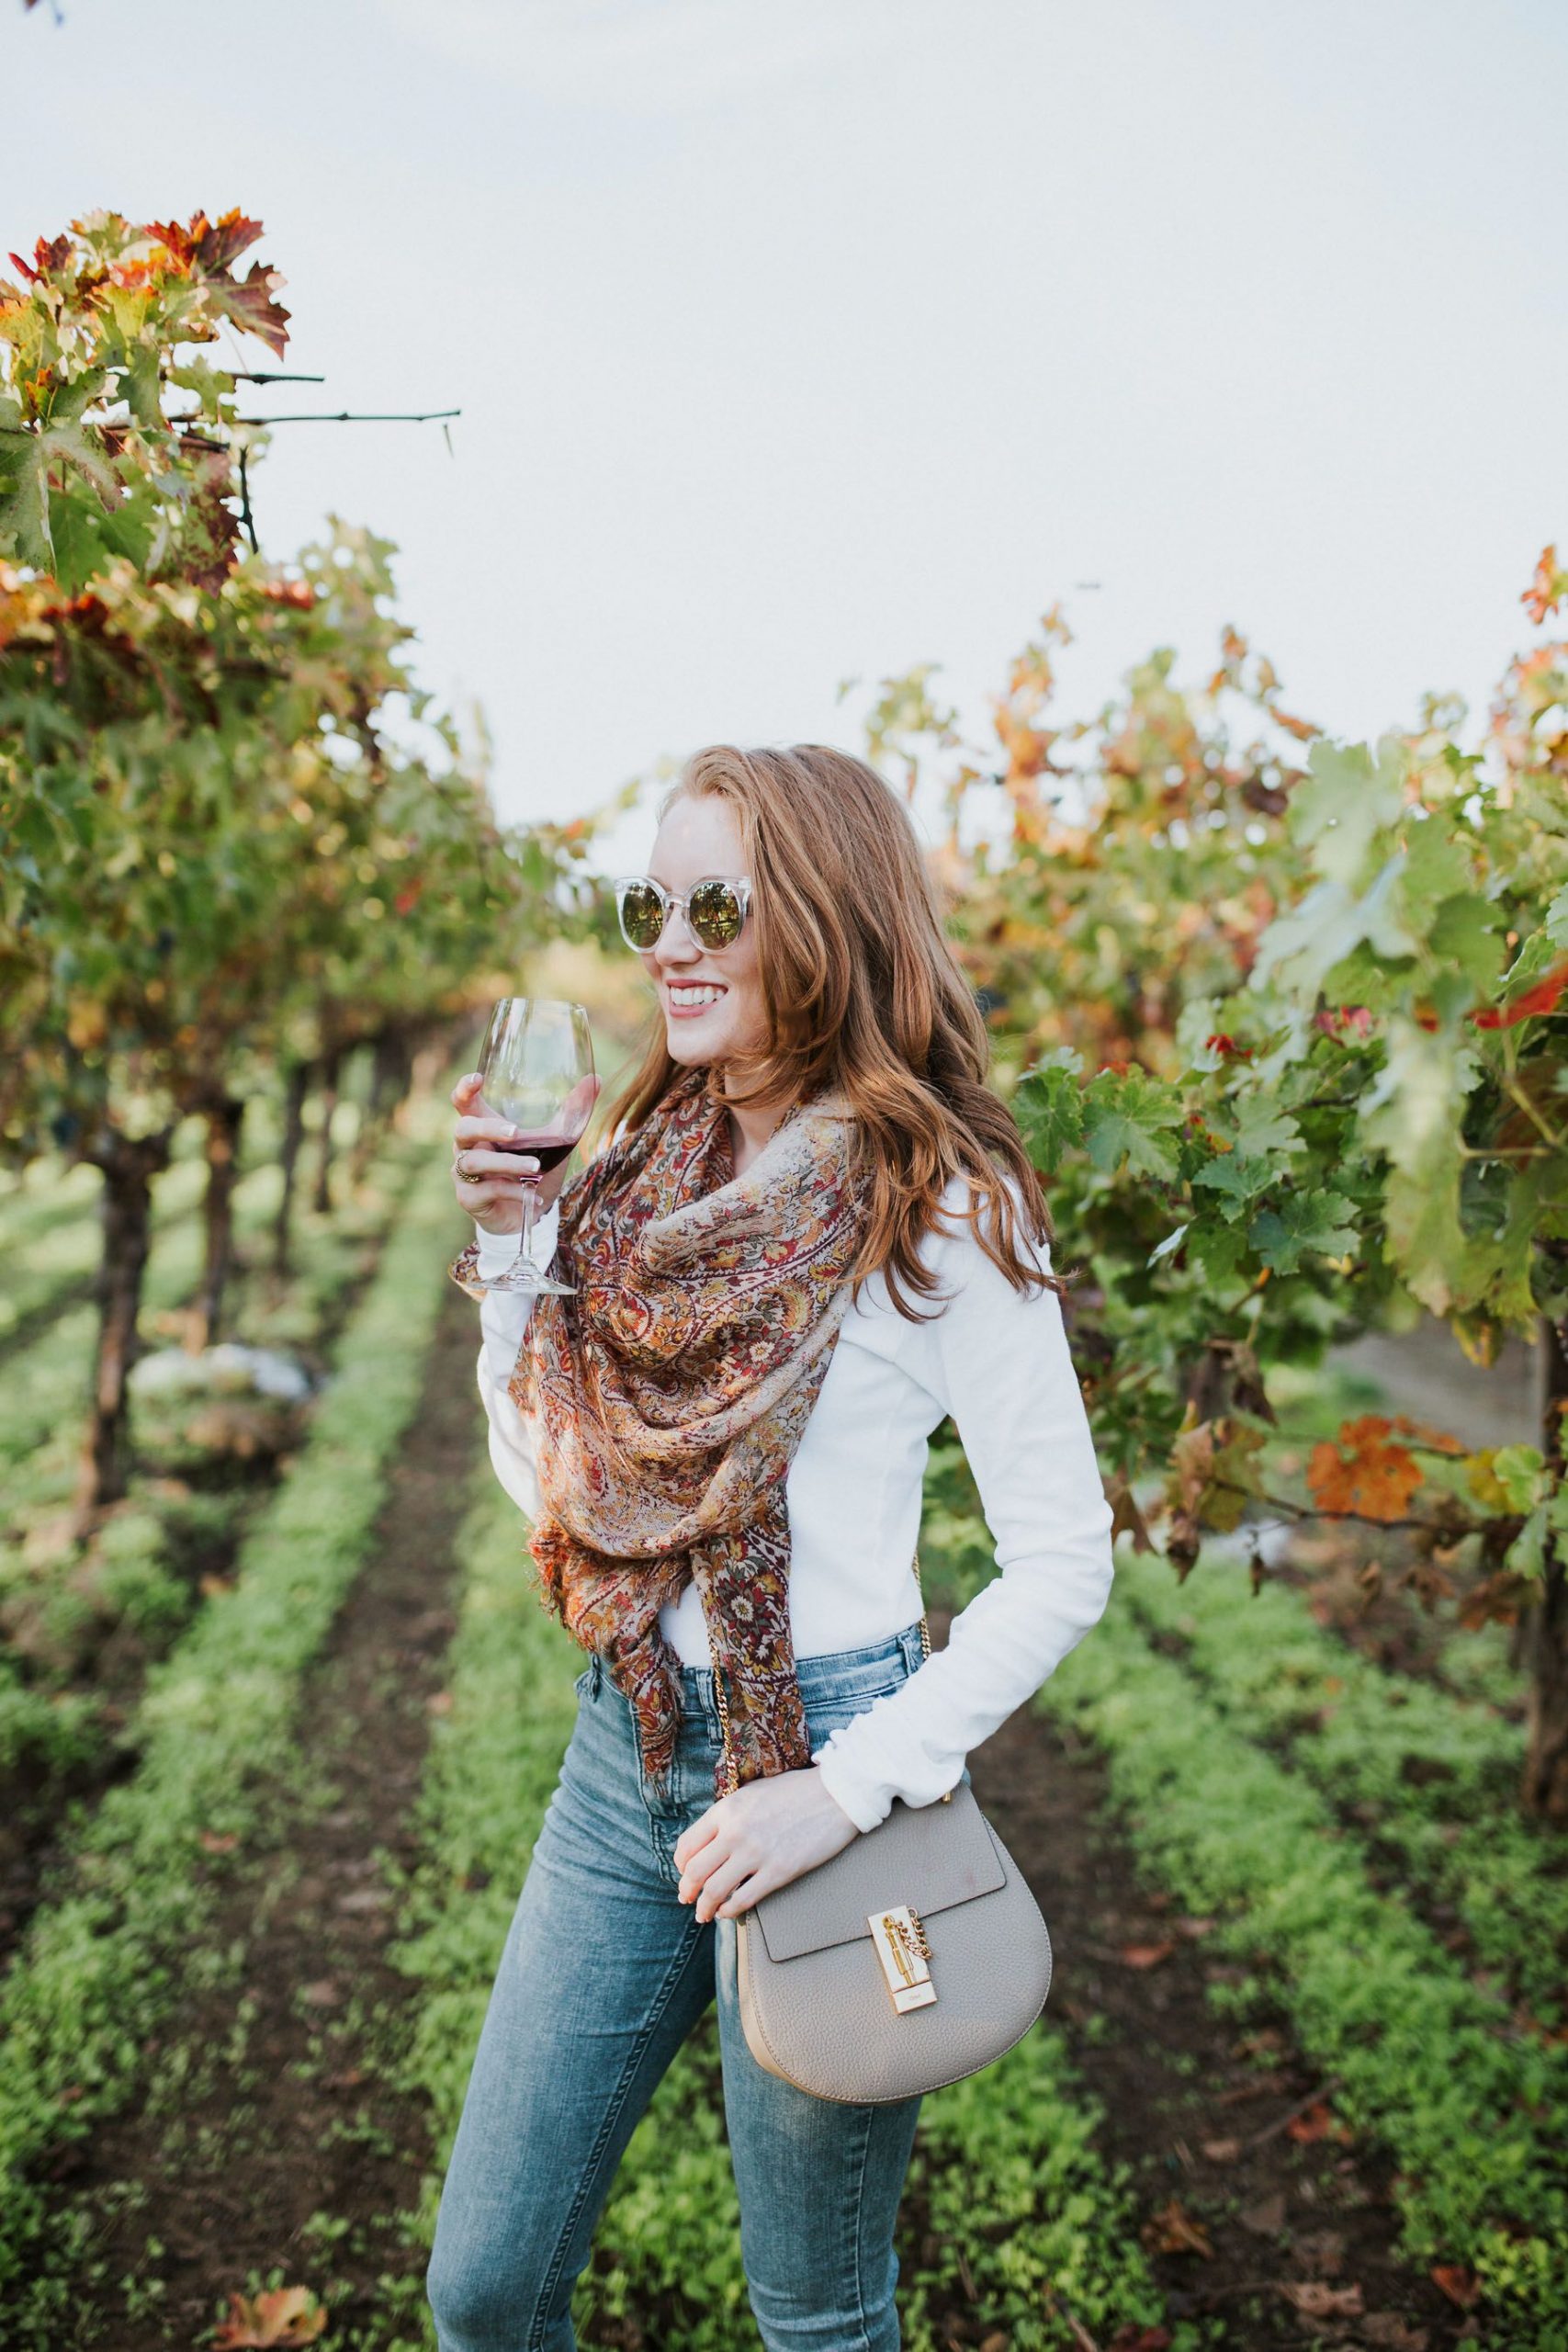 Napa Valley fashion goals are on the style blog